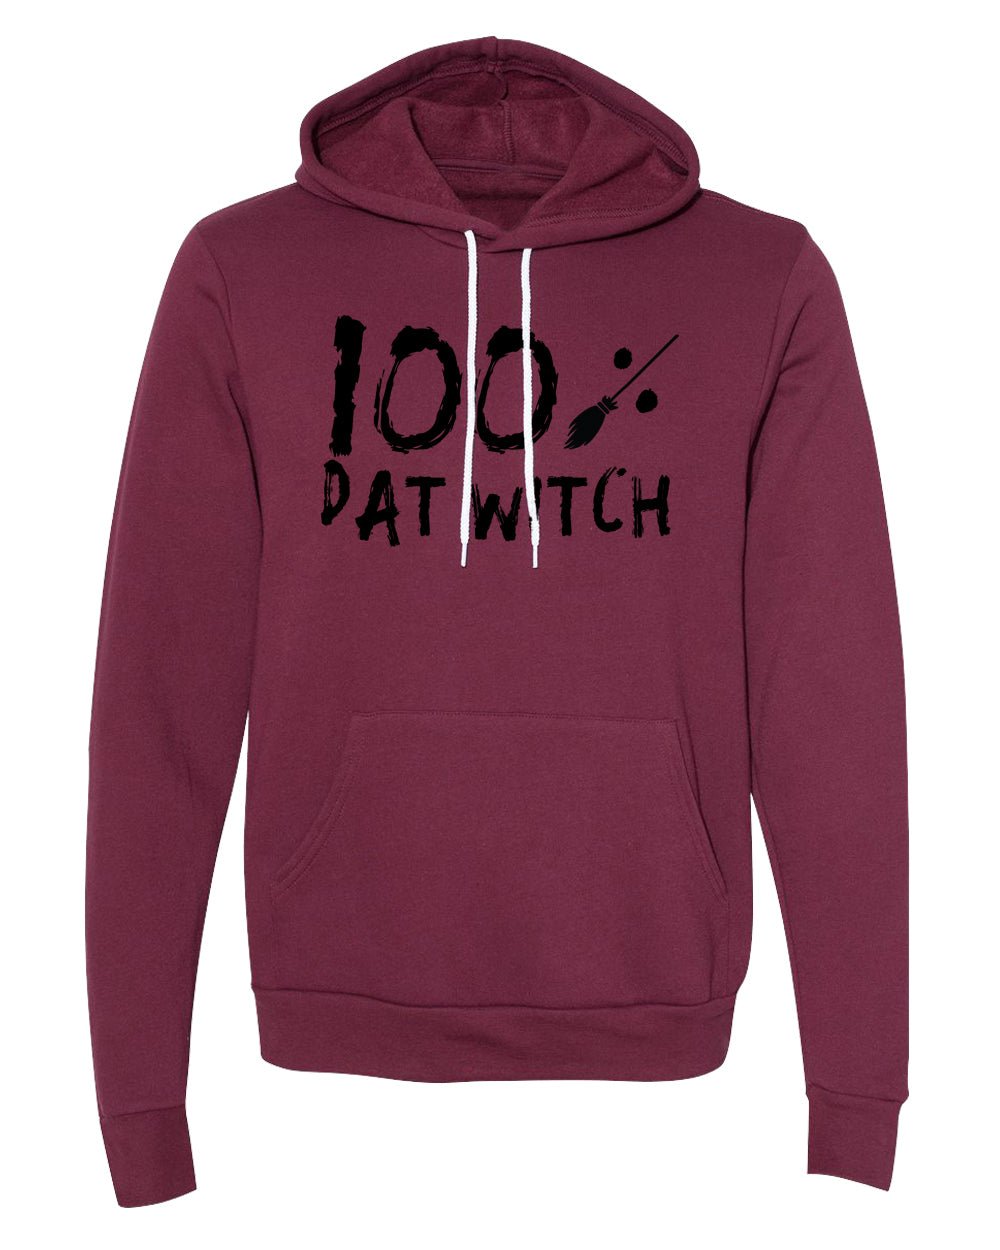 Sweater - 100% Dat Witch  Hoodie Cotton, 's Graphic Hoodie, Halloween Hoodie